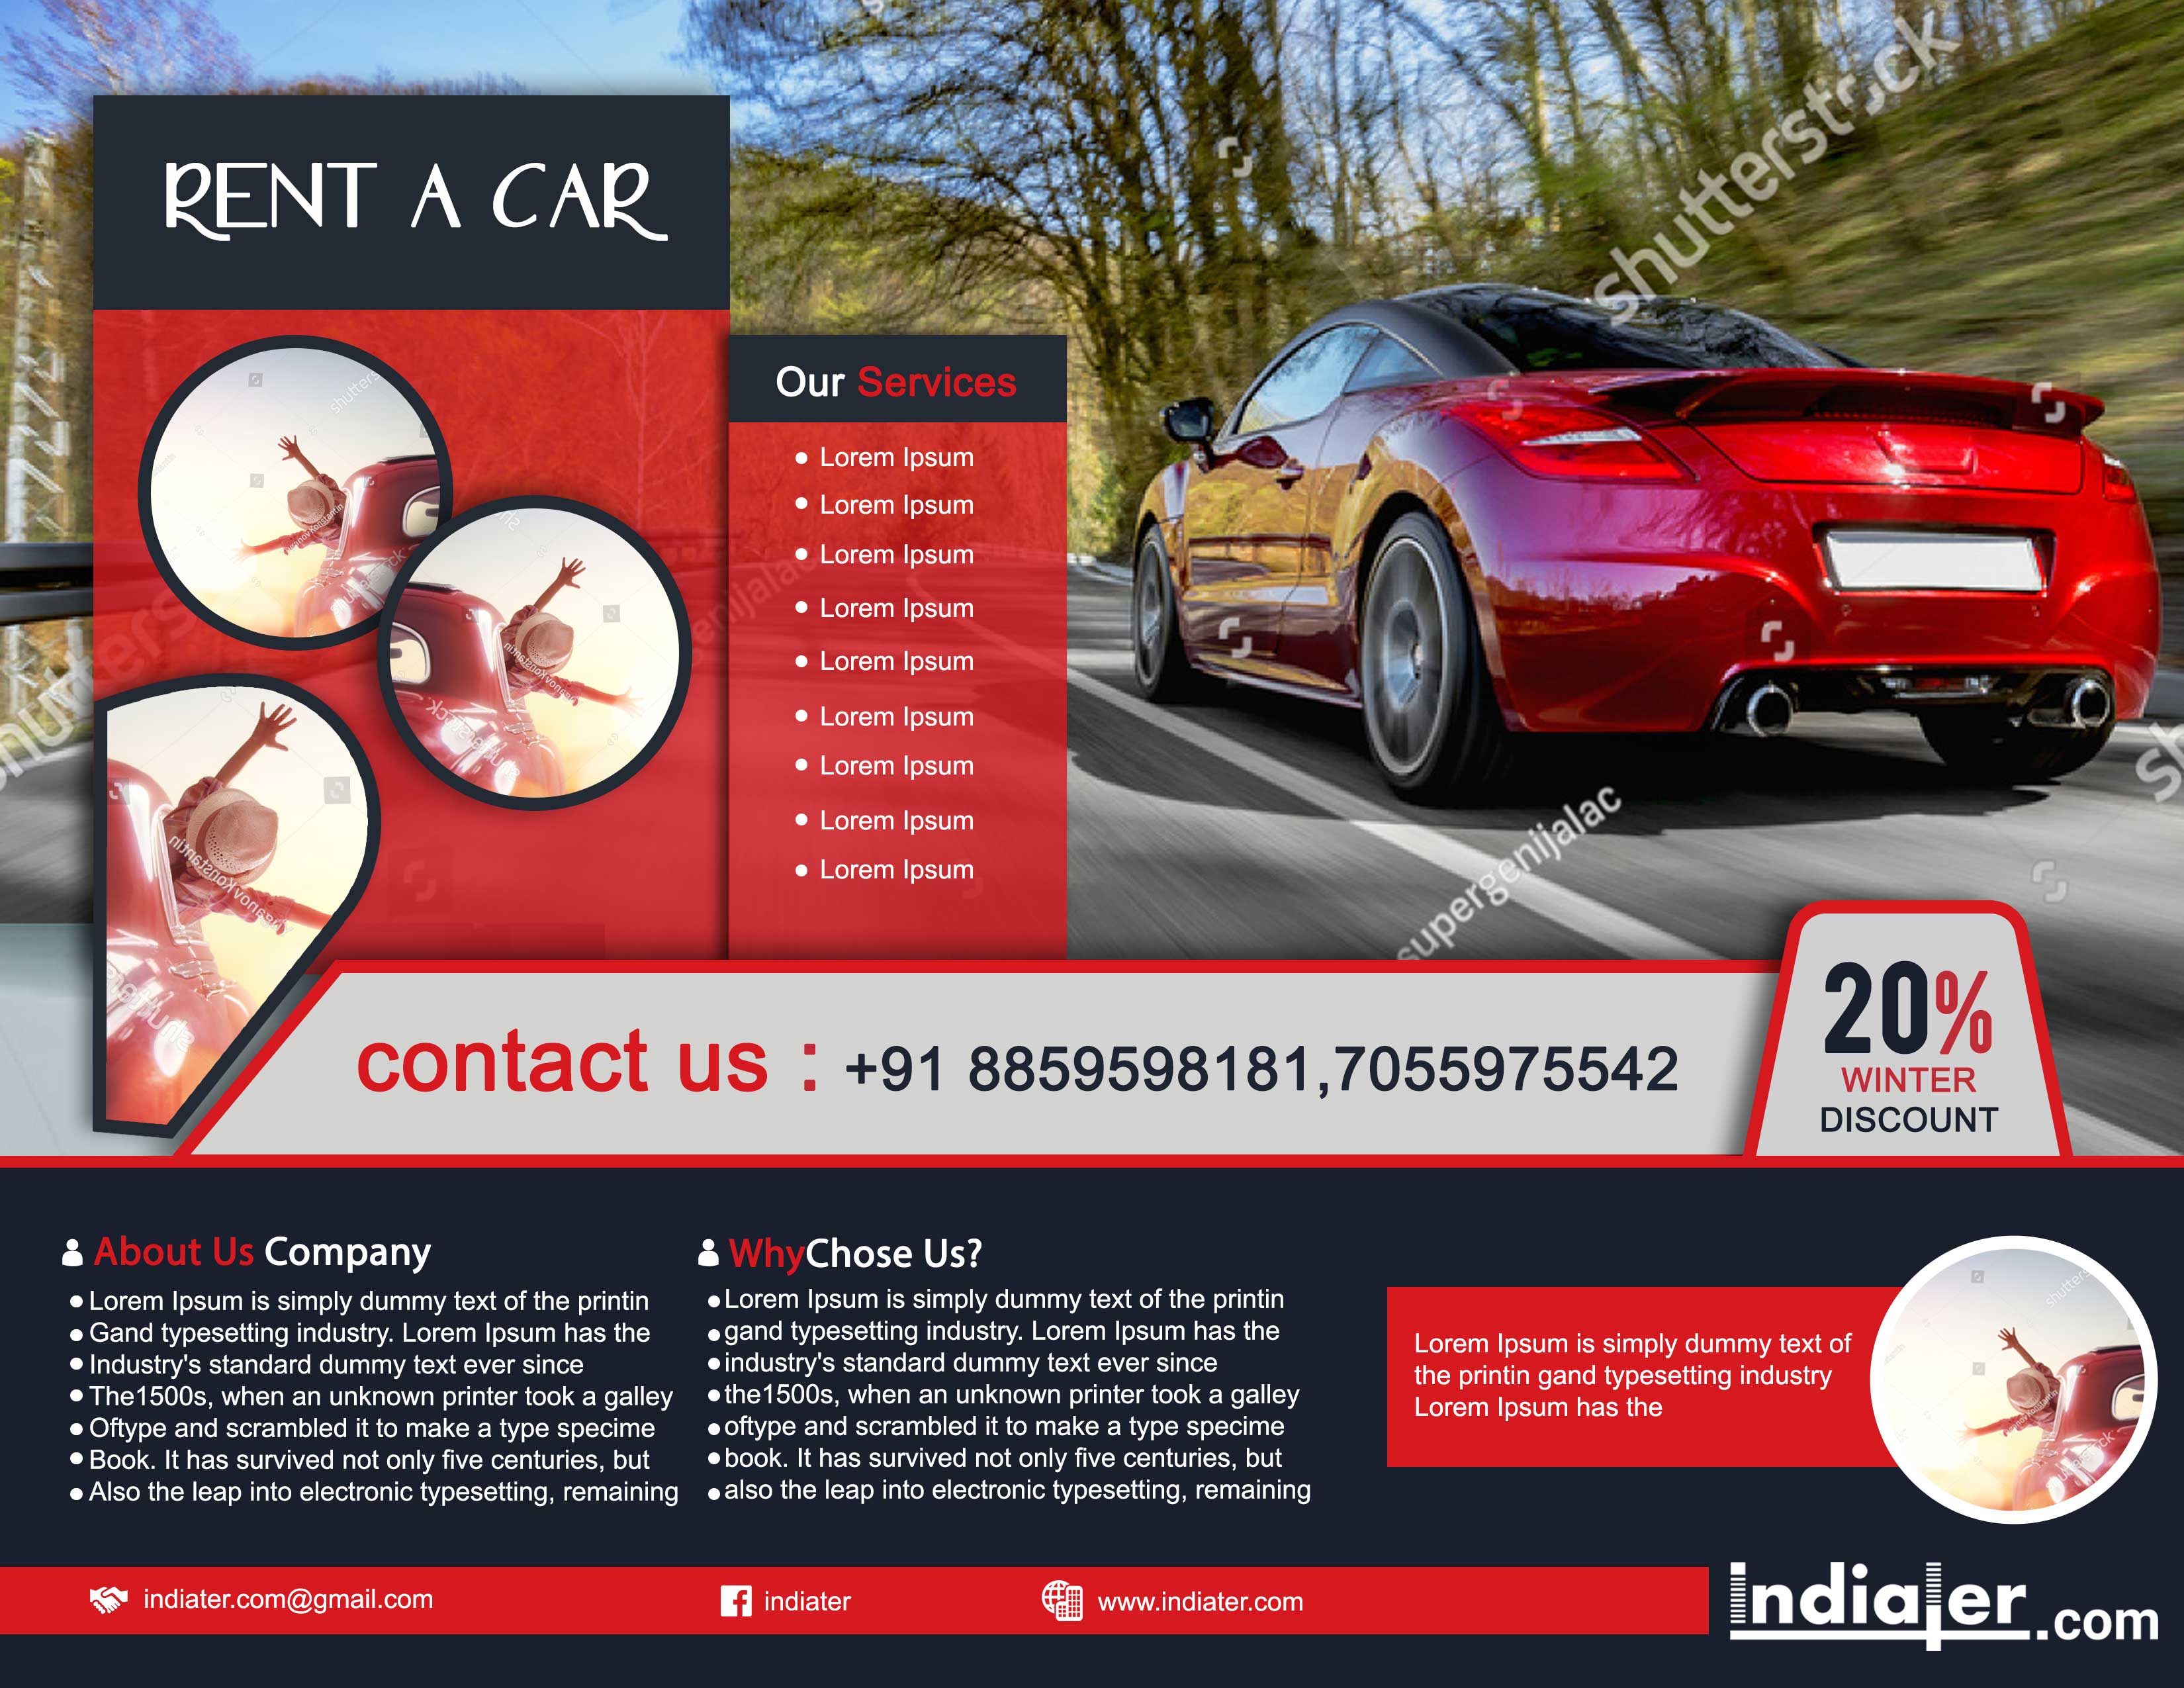 free-car-sales-advertising-flyer-template-indiater